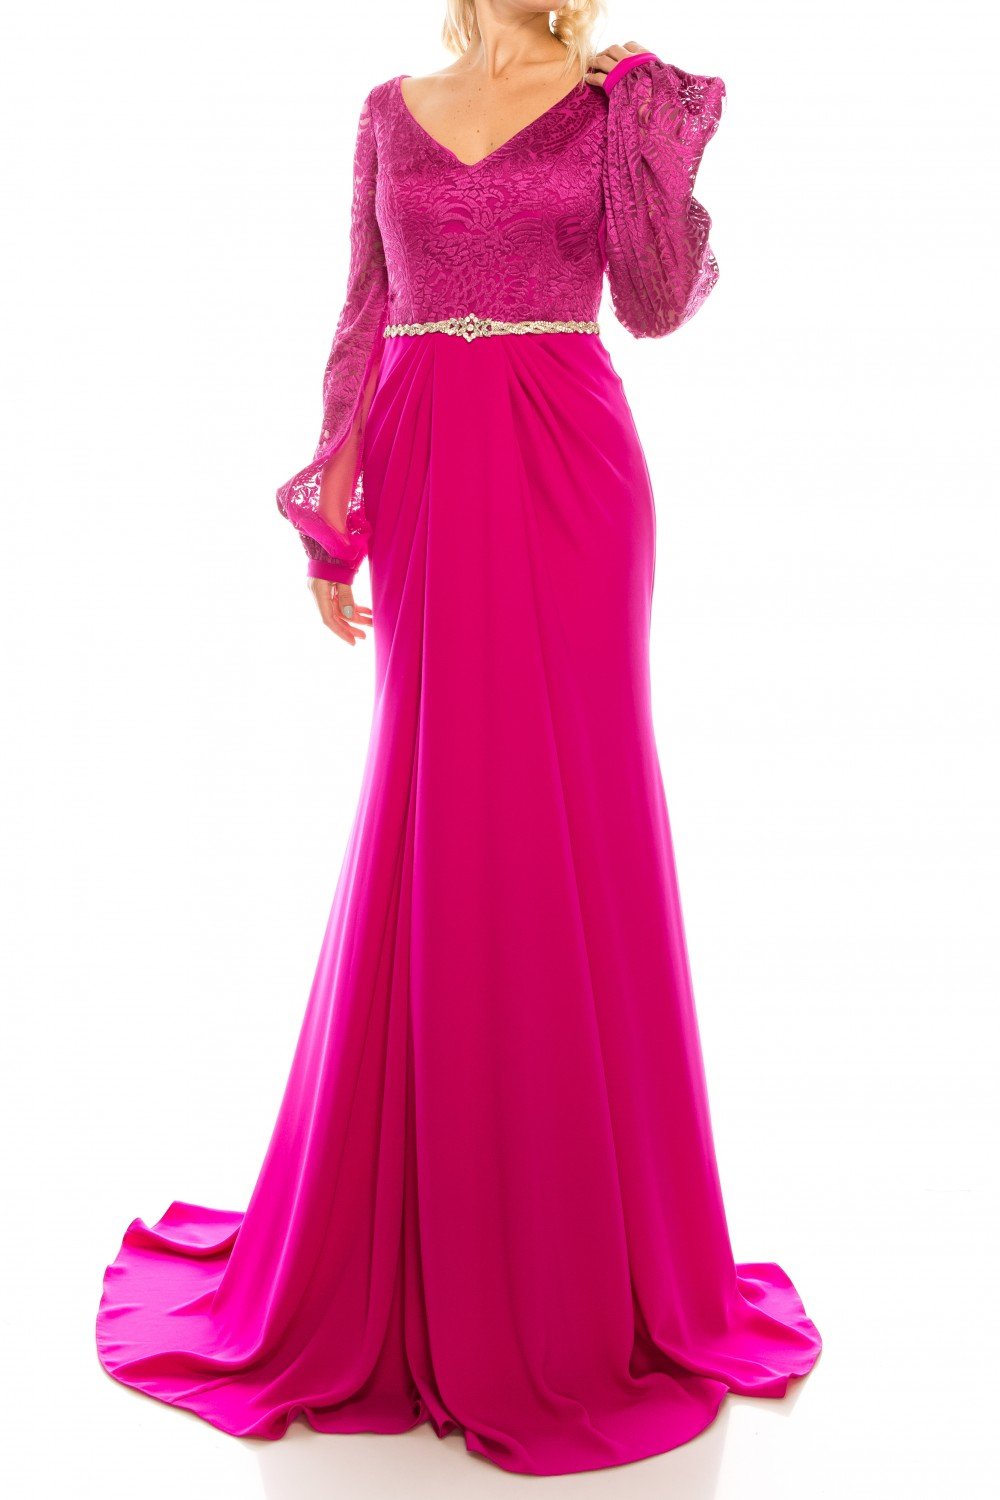 Odrella - 7Y1090 Bishop Sleeve Embroidered Mesh Jacquard Gown In Pink